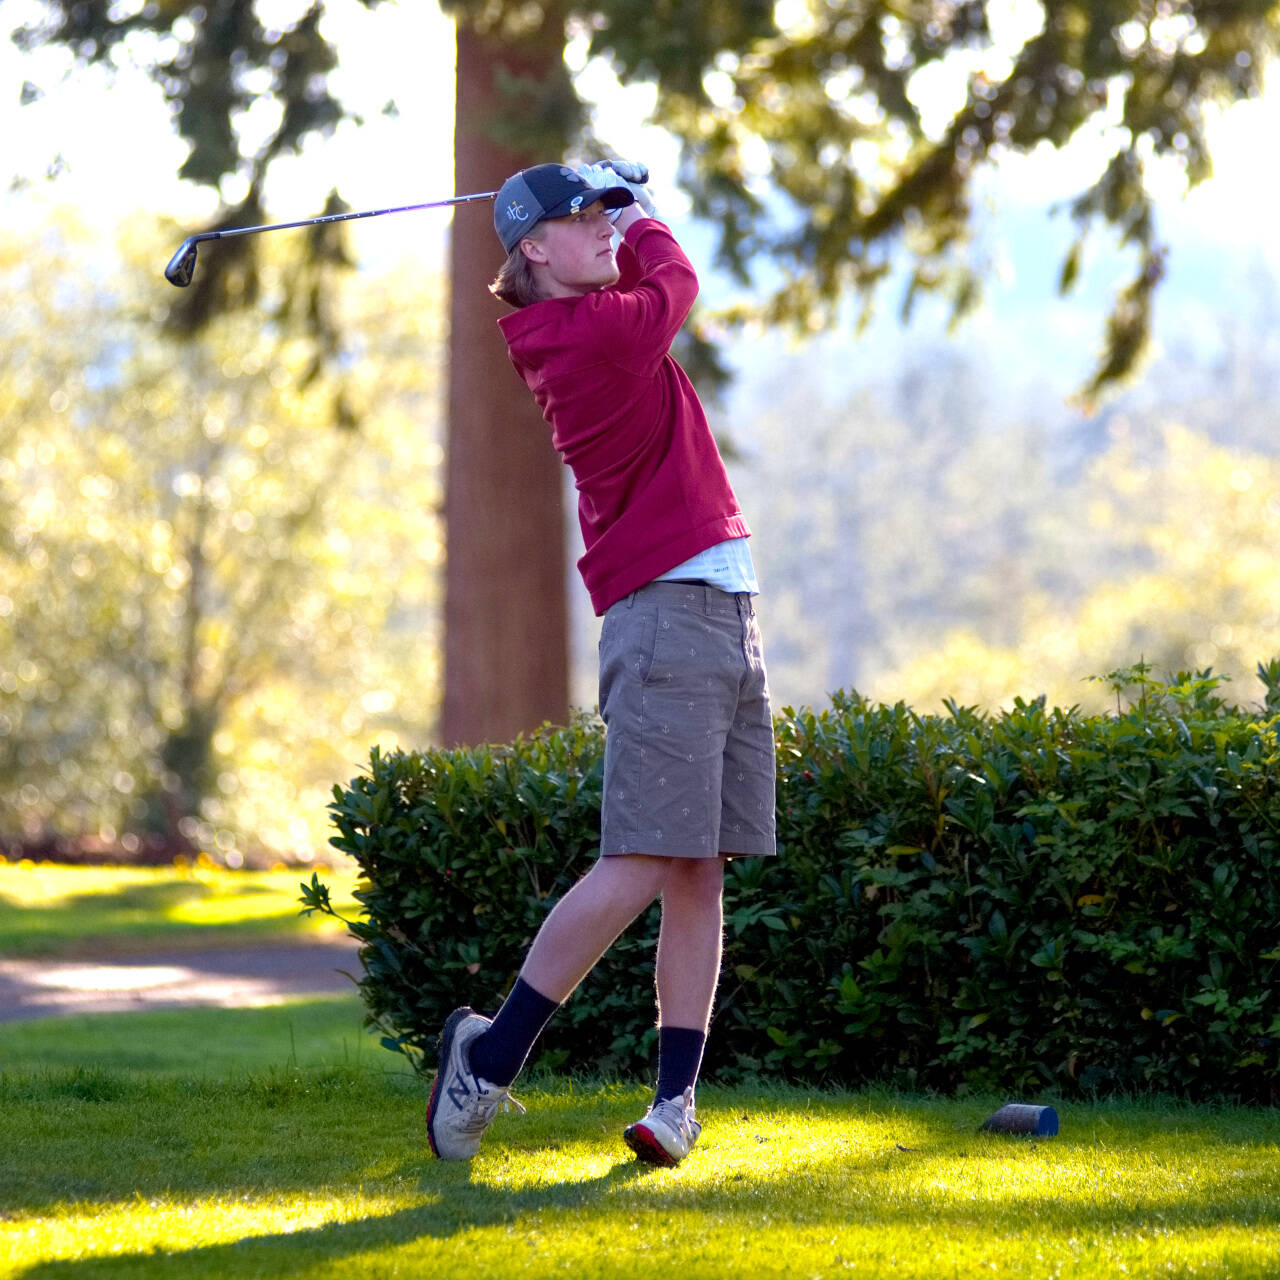 DAILY WORLD FILE PHOTO
Hoquiam golfer Mick Bozich placed fifth overall in the 1A District 4 Tournament last week, leading the Grizzlies boys golf team to a second-place finish.